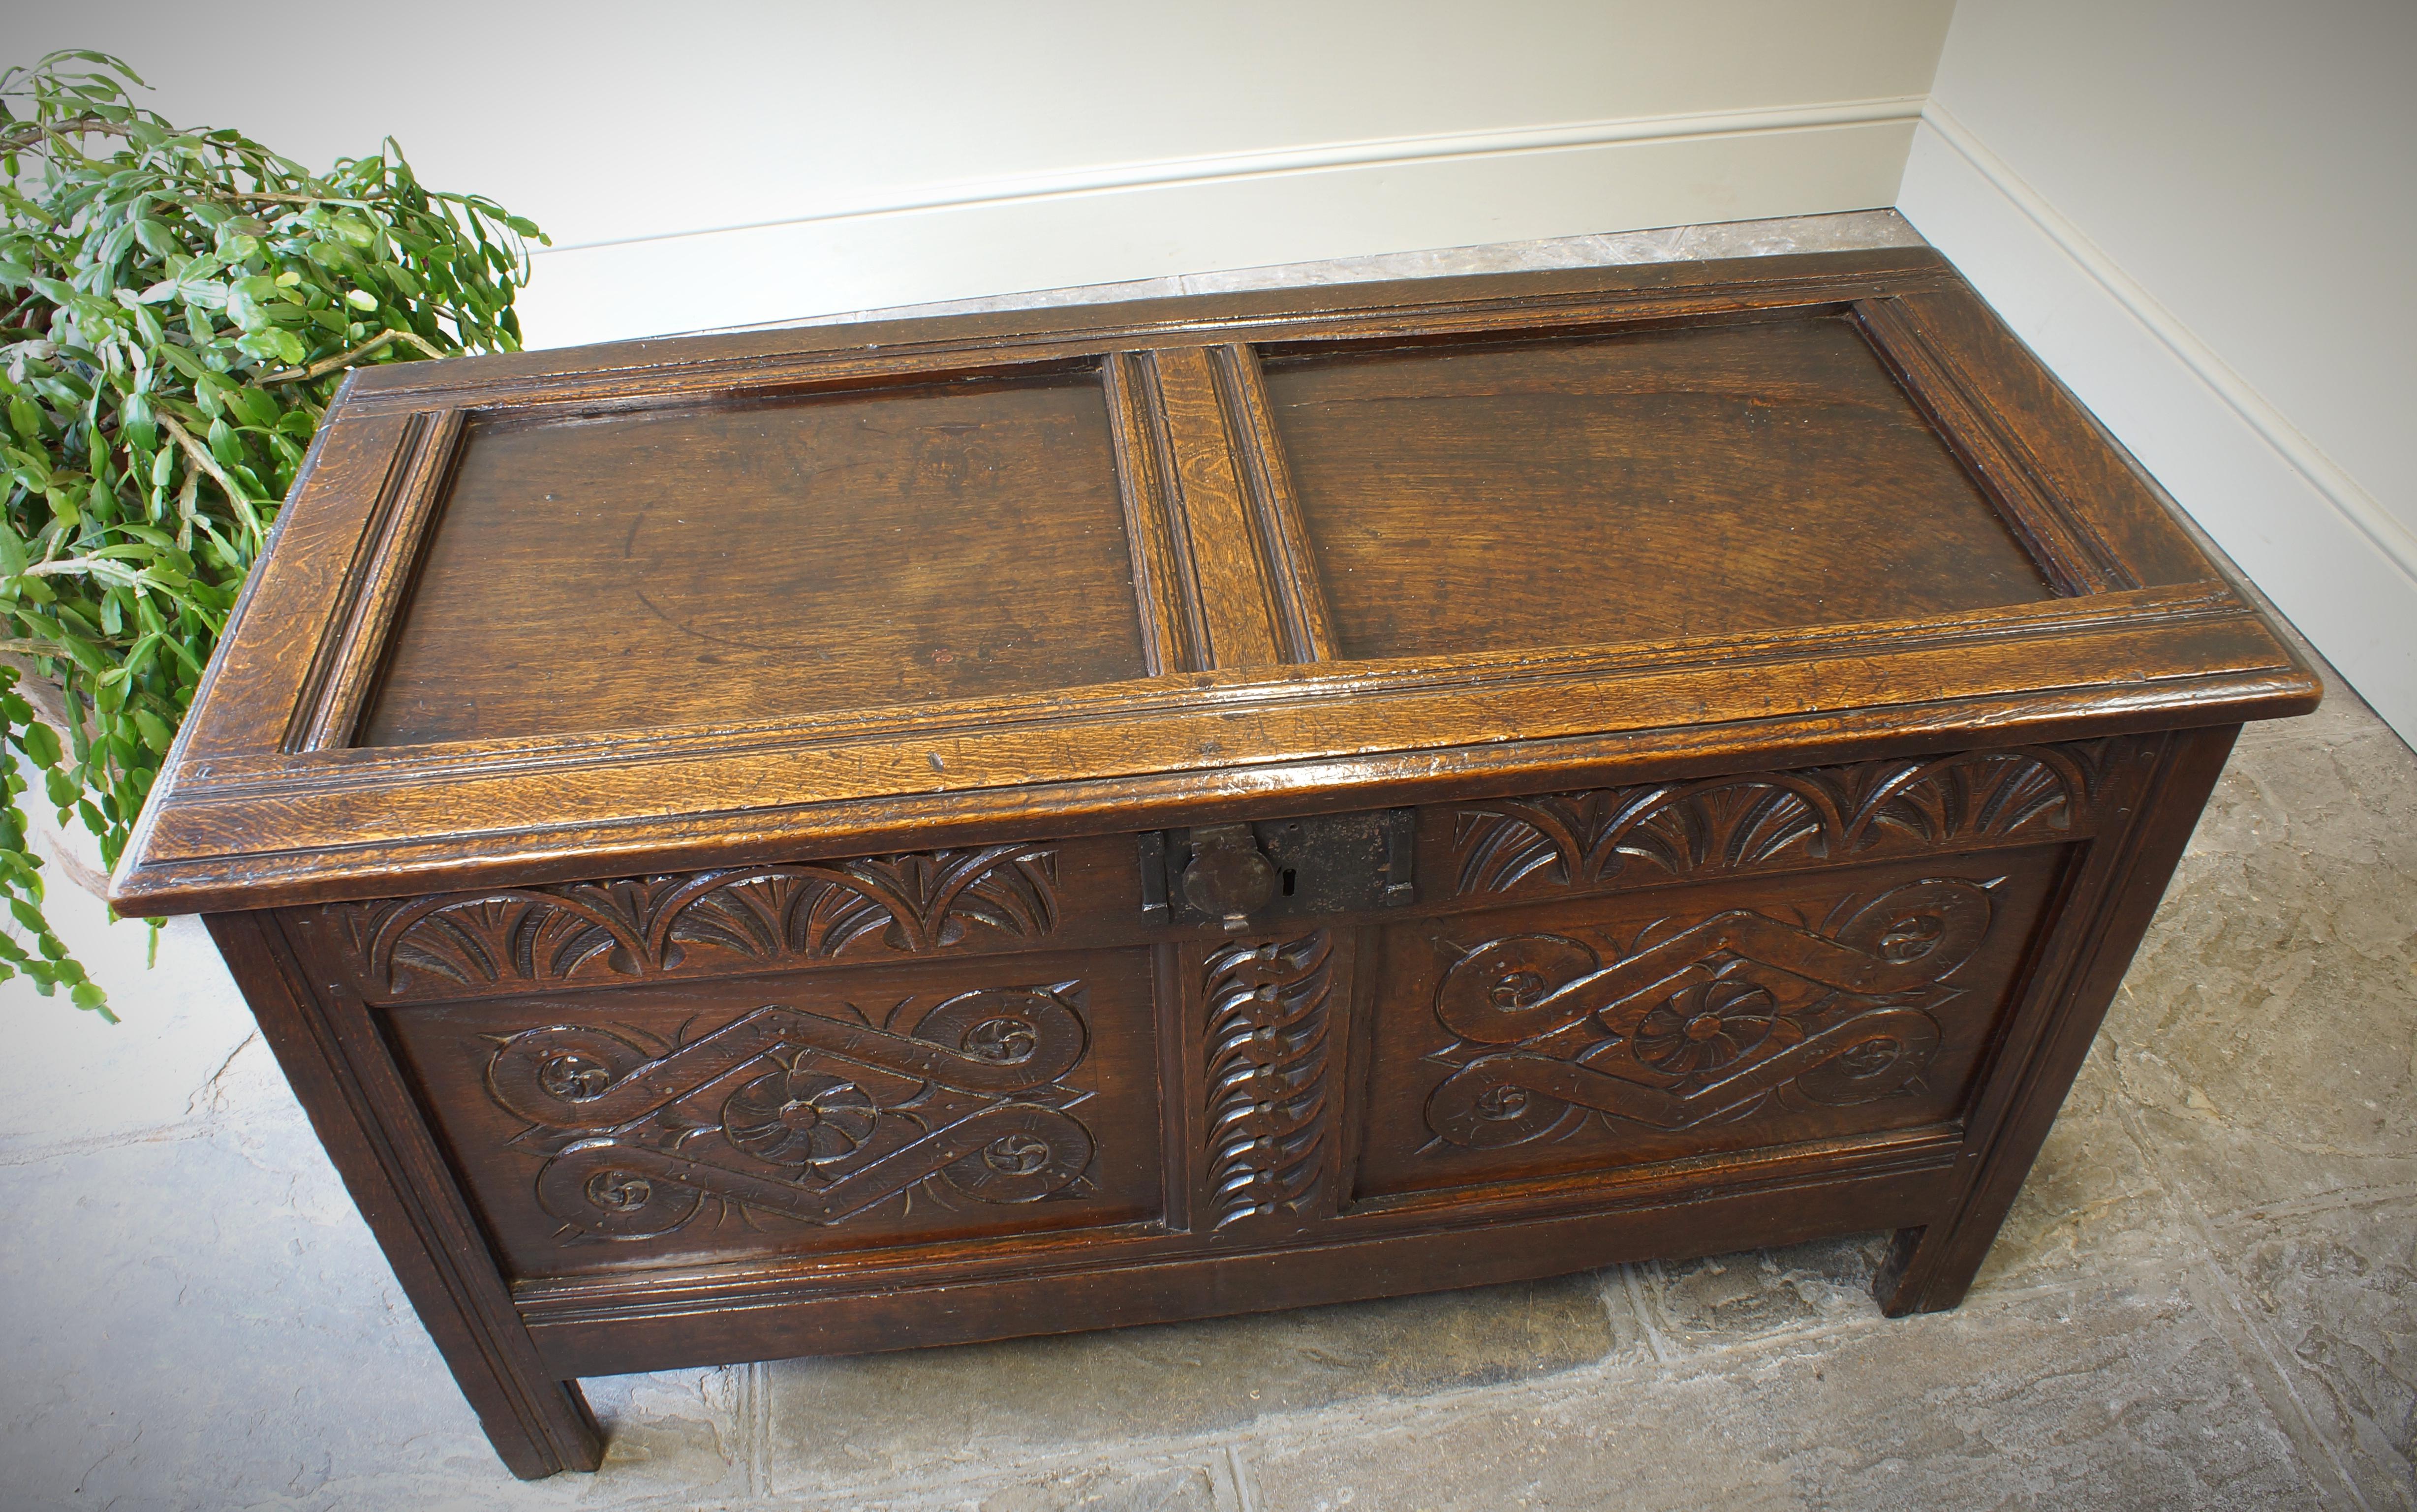 An excellent  17th Century Two Panelled Oak Coffer in good clean original condition, having good colour and patina. The panels are nicely carved with stylized lozenges and the top rail has crisply carved lunettes. Clean inside and with a wonderfully